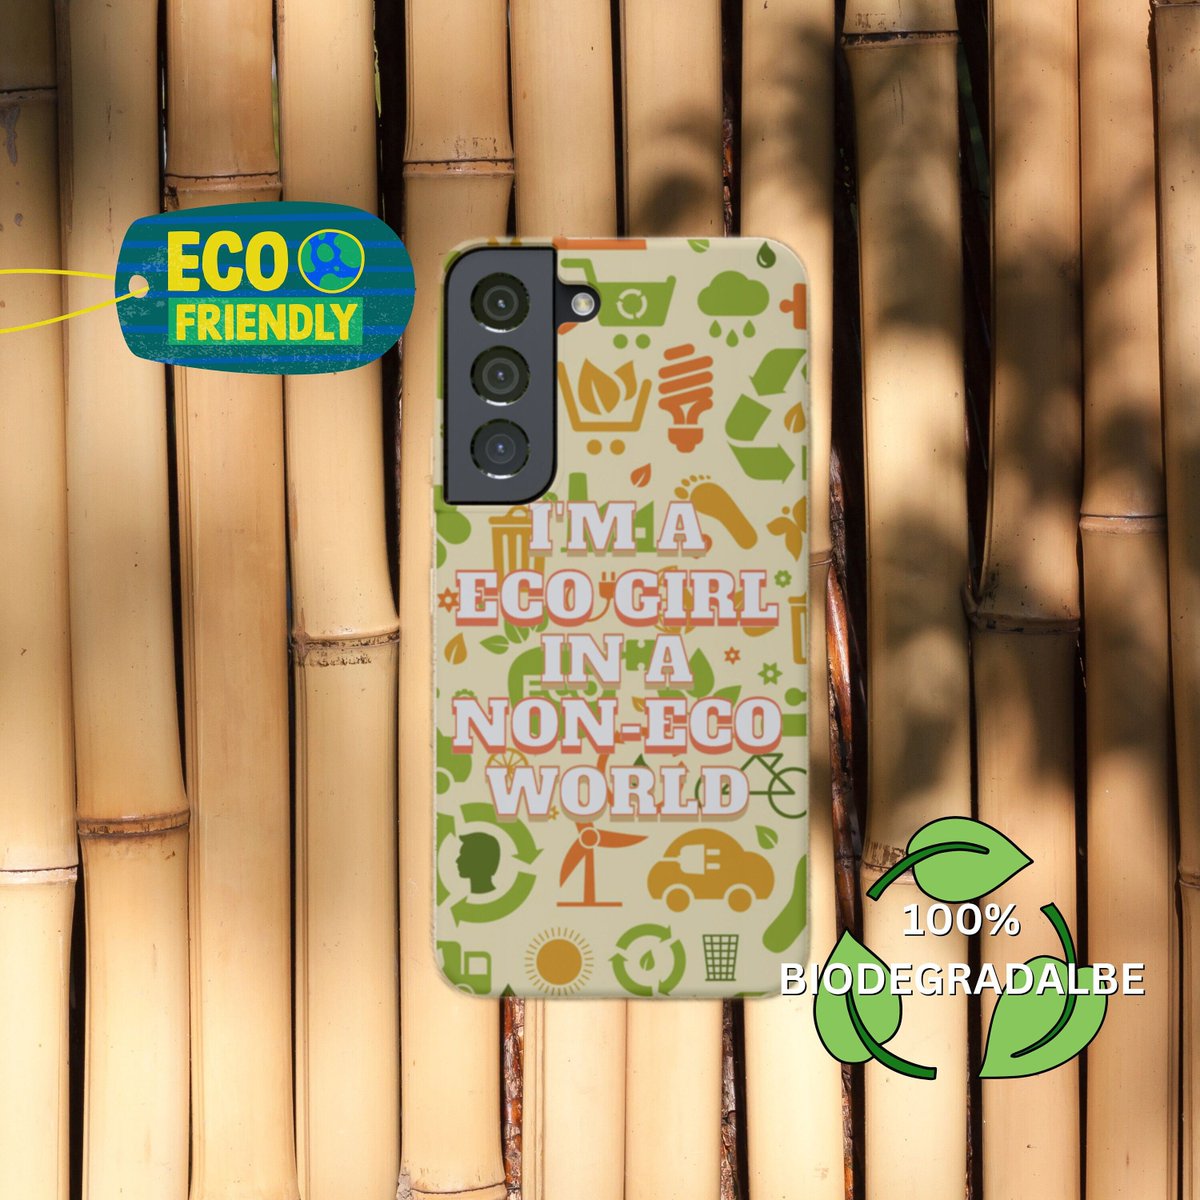 etsy.me/40iOZMA
100% Biodegradable Phone Cases For Samsung Galaxy, ECO Girl Design, #biodegradable #ecofriendly #bamboofibers #BPAfree #samsungphonecases #galaxyS22 #galaxyS21 #galaxyS20 #cadmiumfree #phthalatesfree #savetheearth #scratchresistant